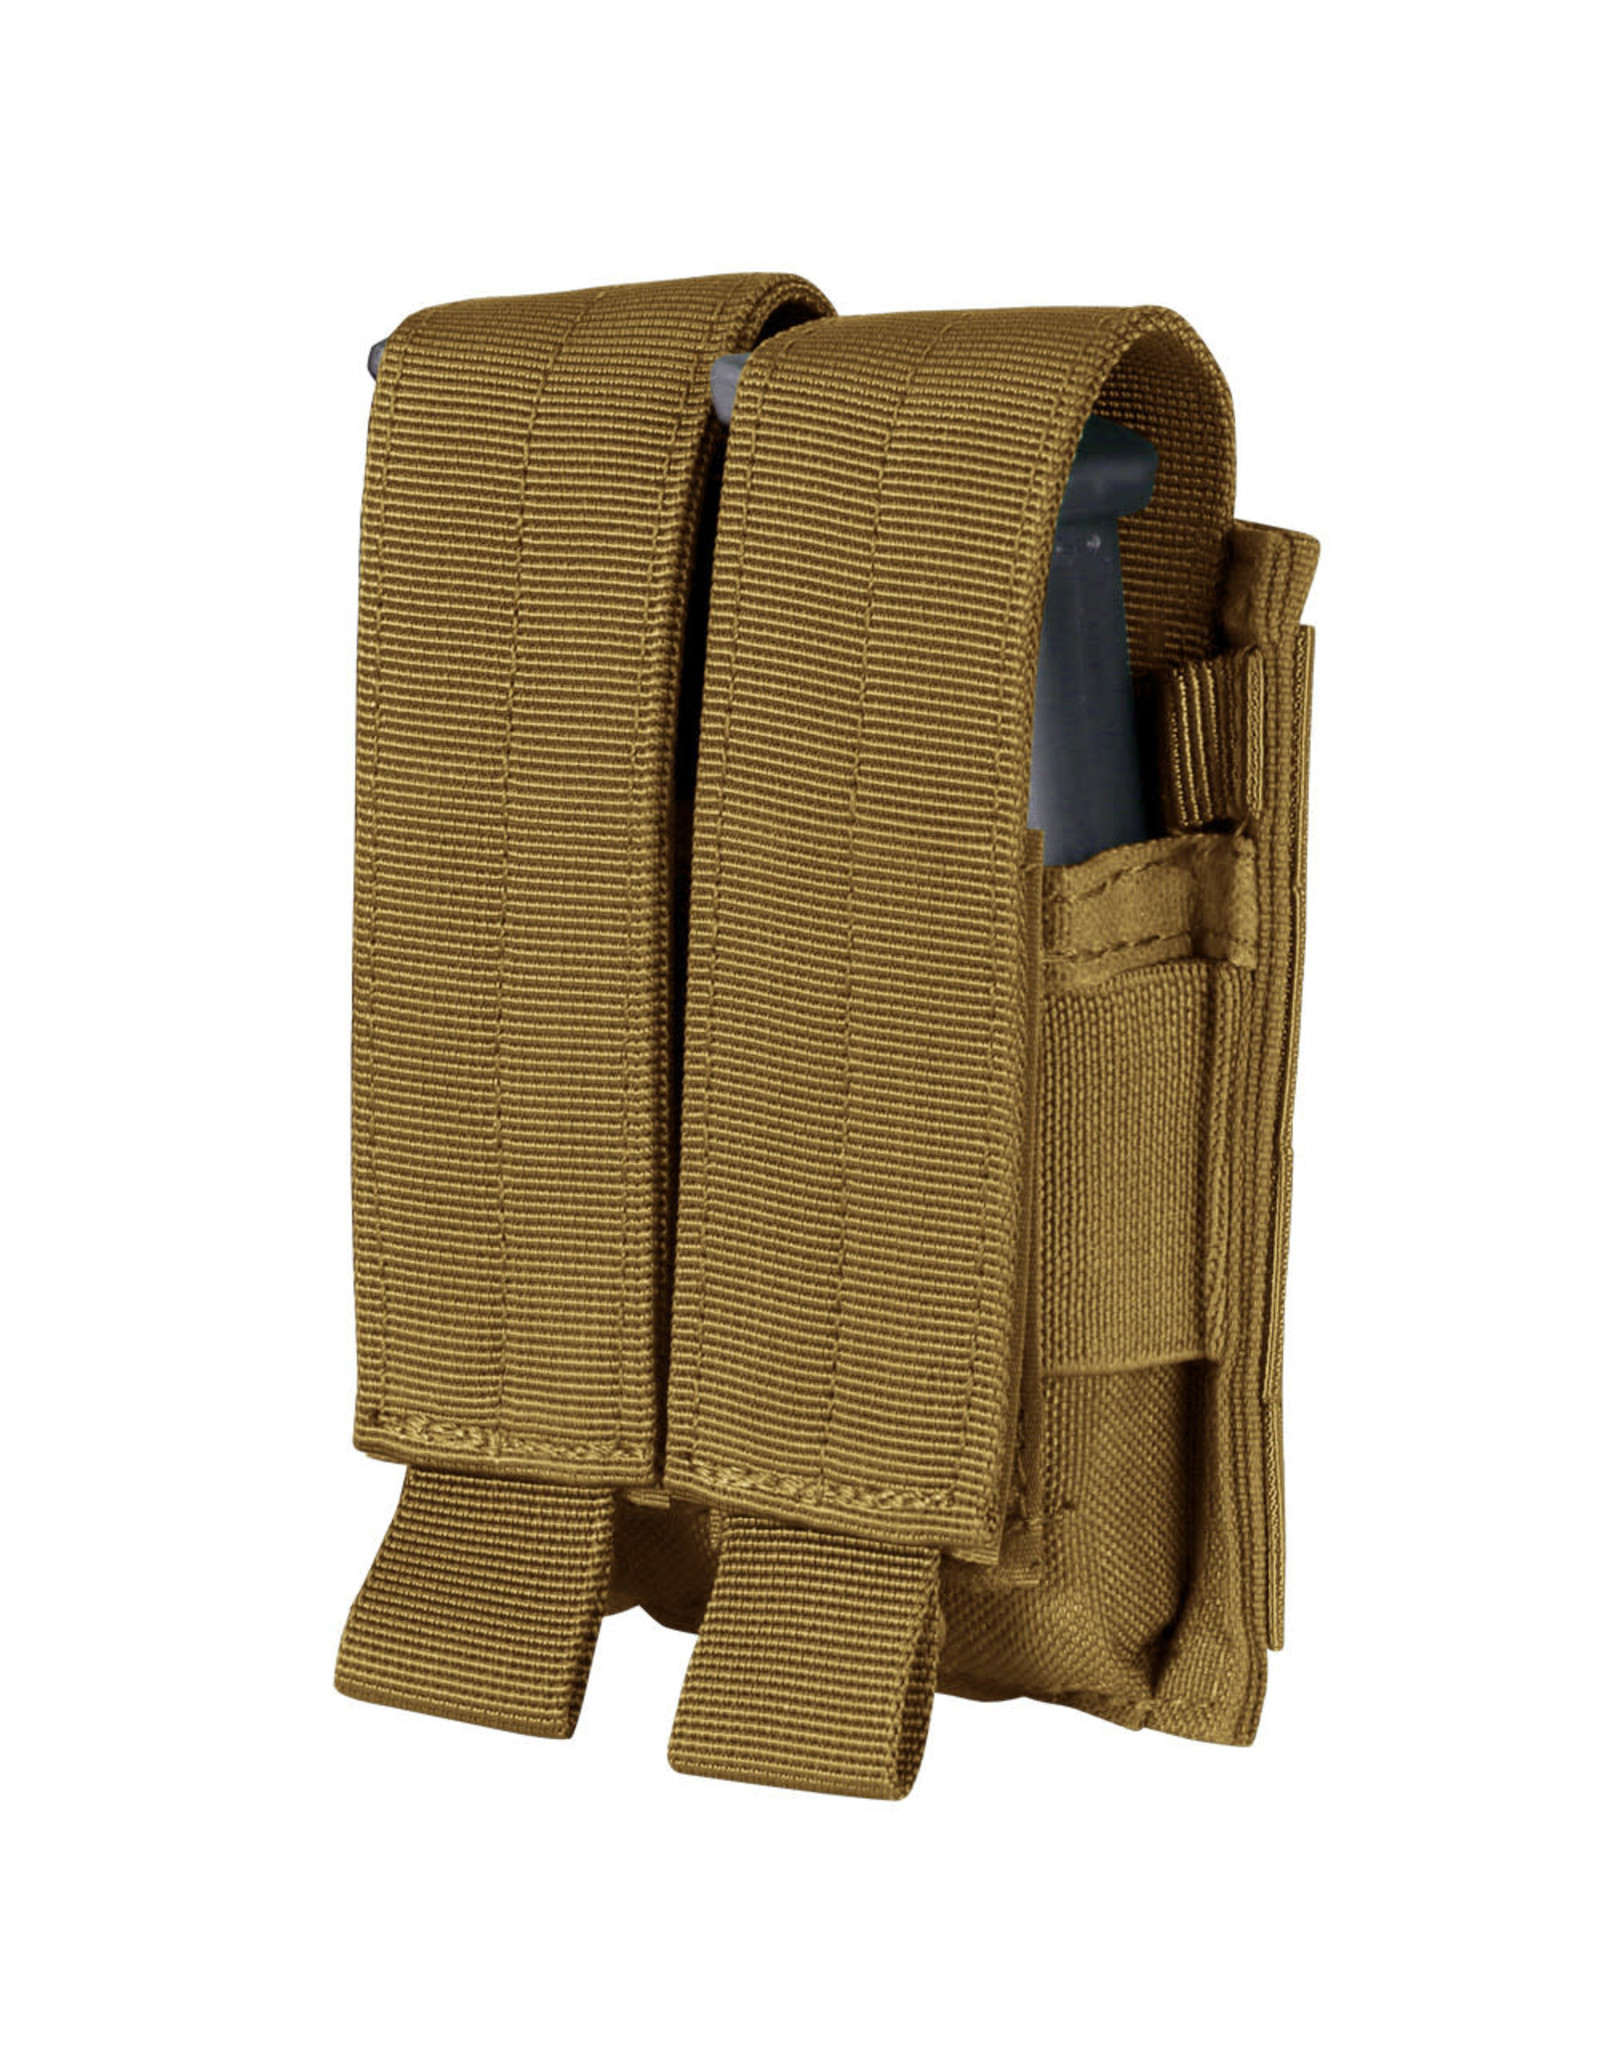 SHADOW STRATEGIC DOUBLE PISTOL MAG POUCH